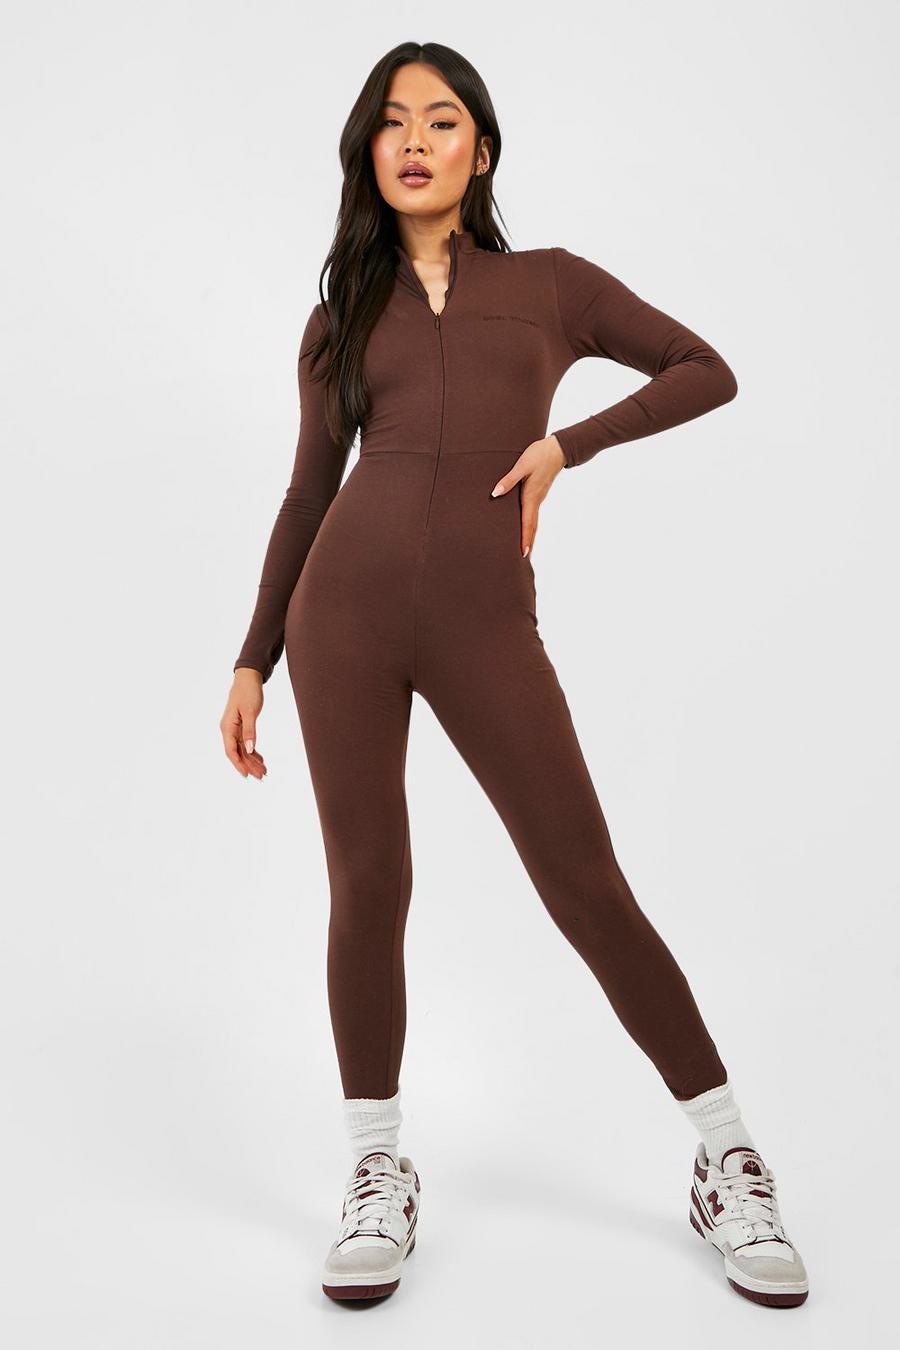 Chocolate brown Embroidered Zip Front Fitted Sculpt Jumpsuit